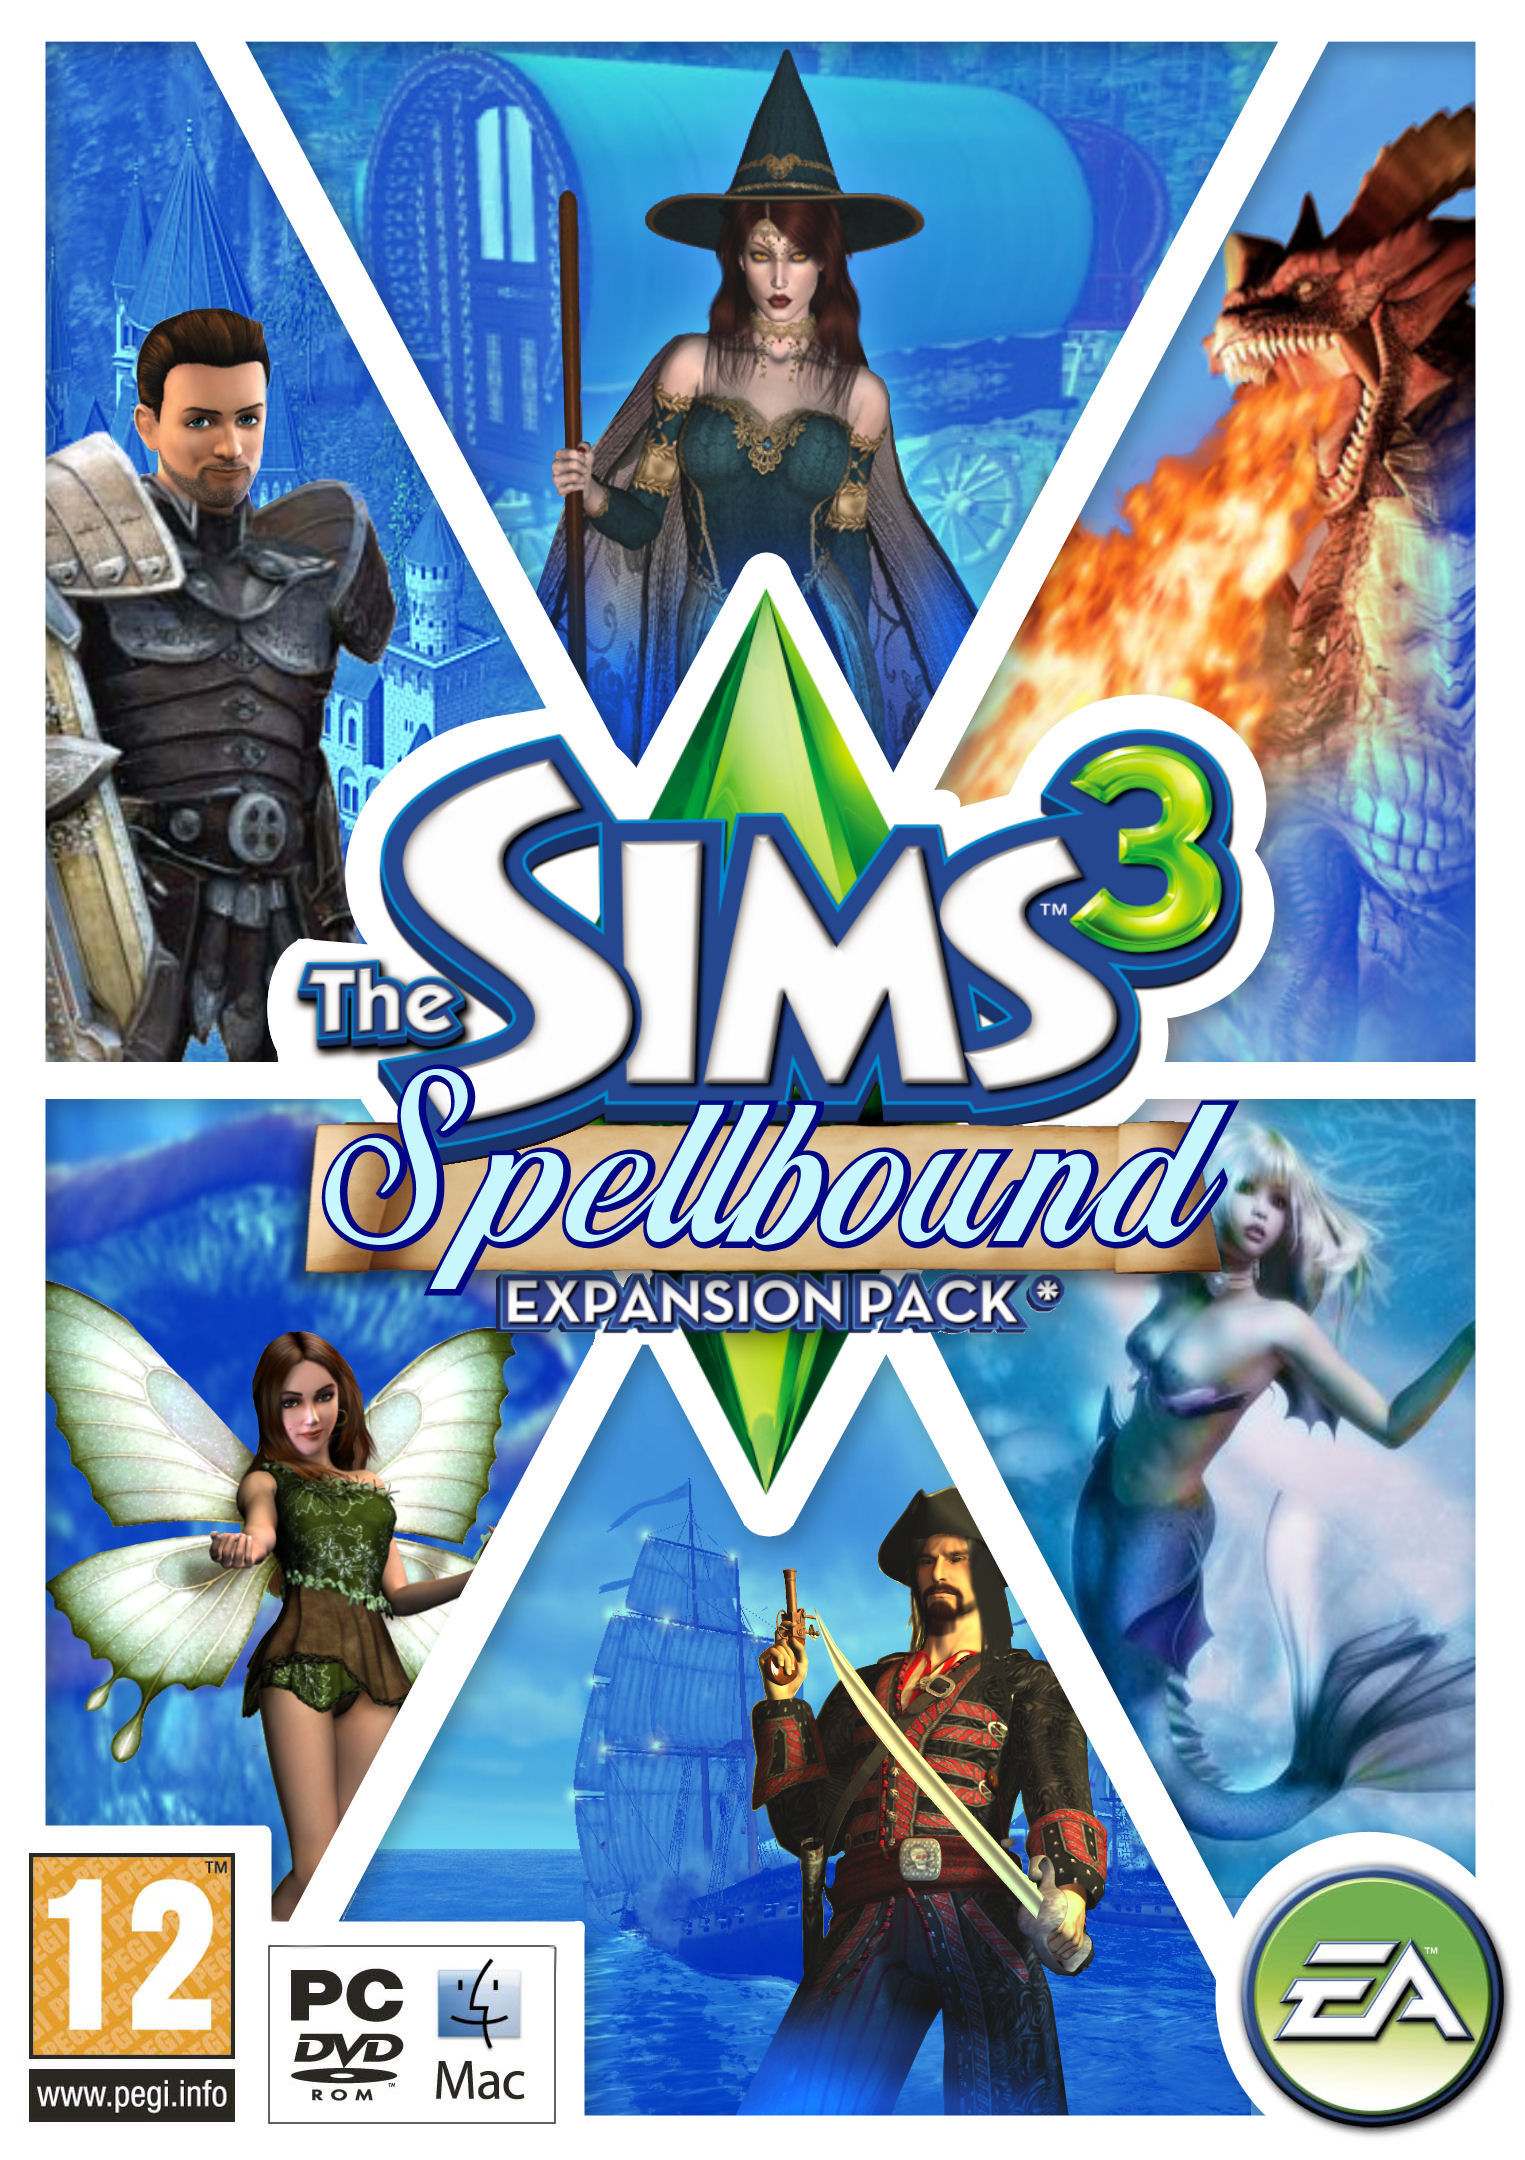 the sims 2 all expansions and stuff packs download